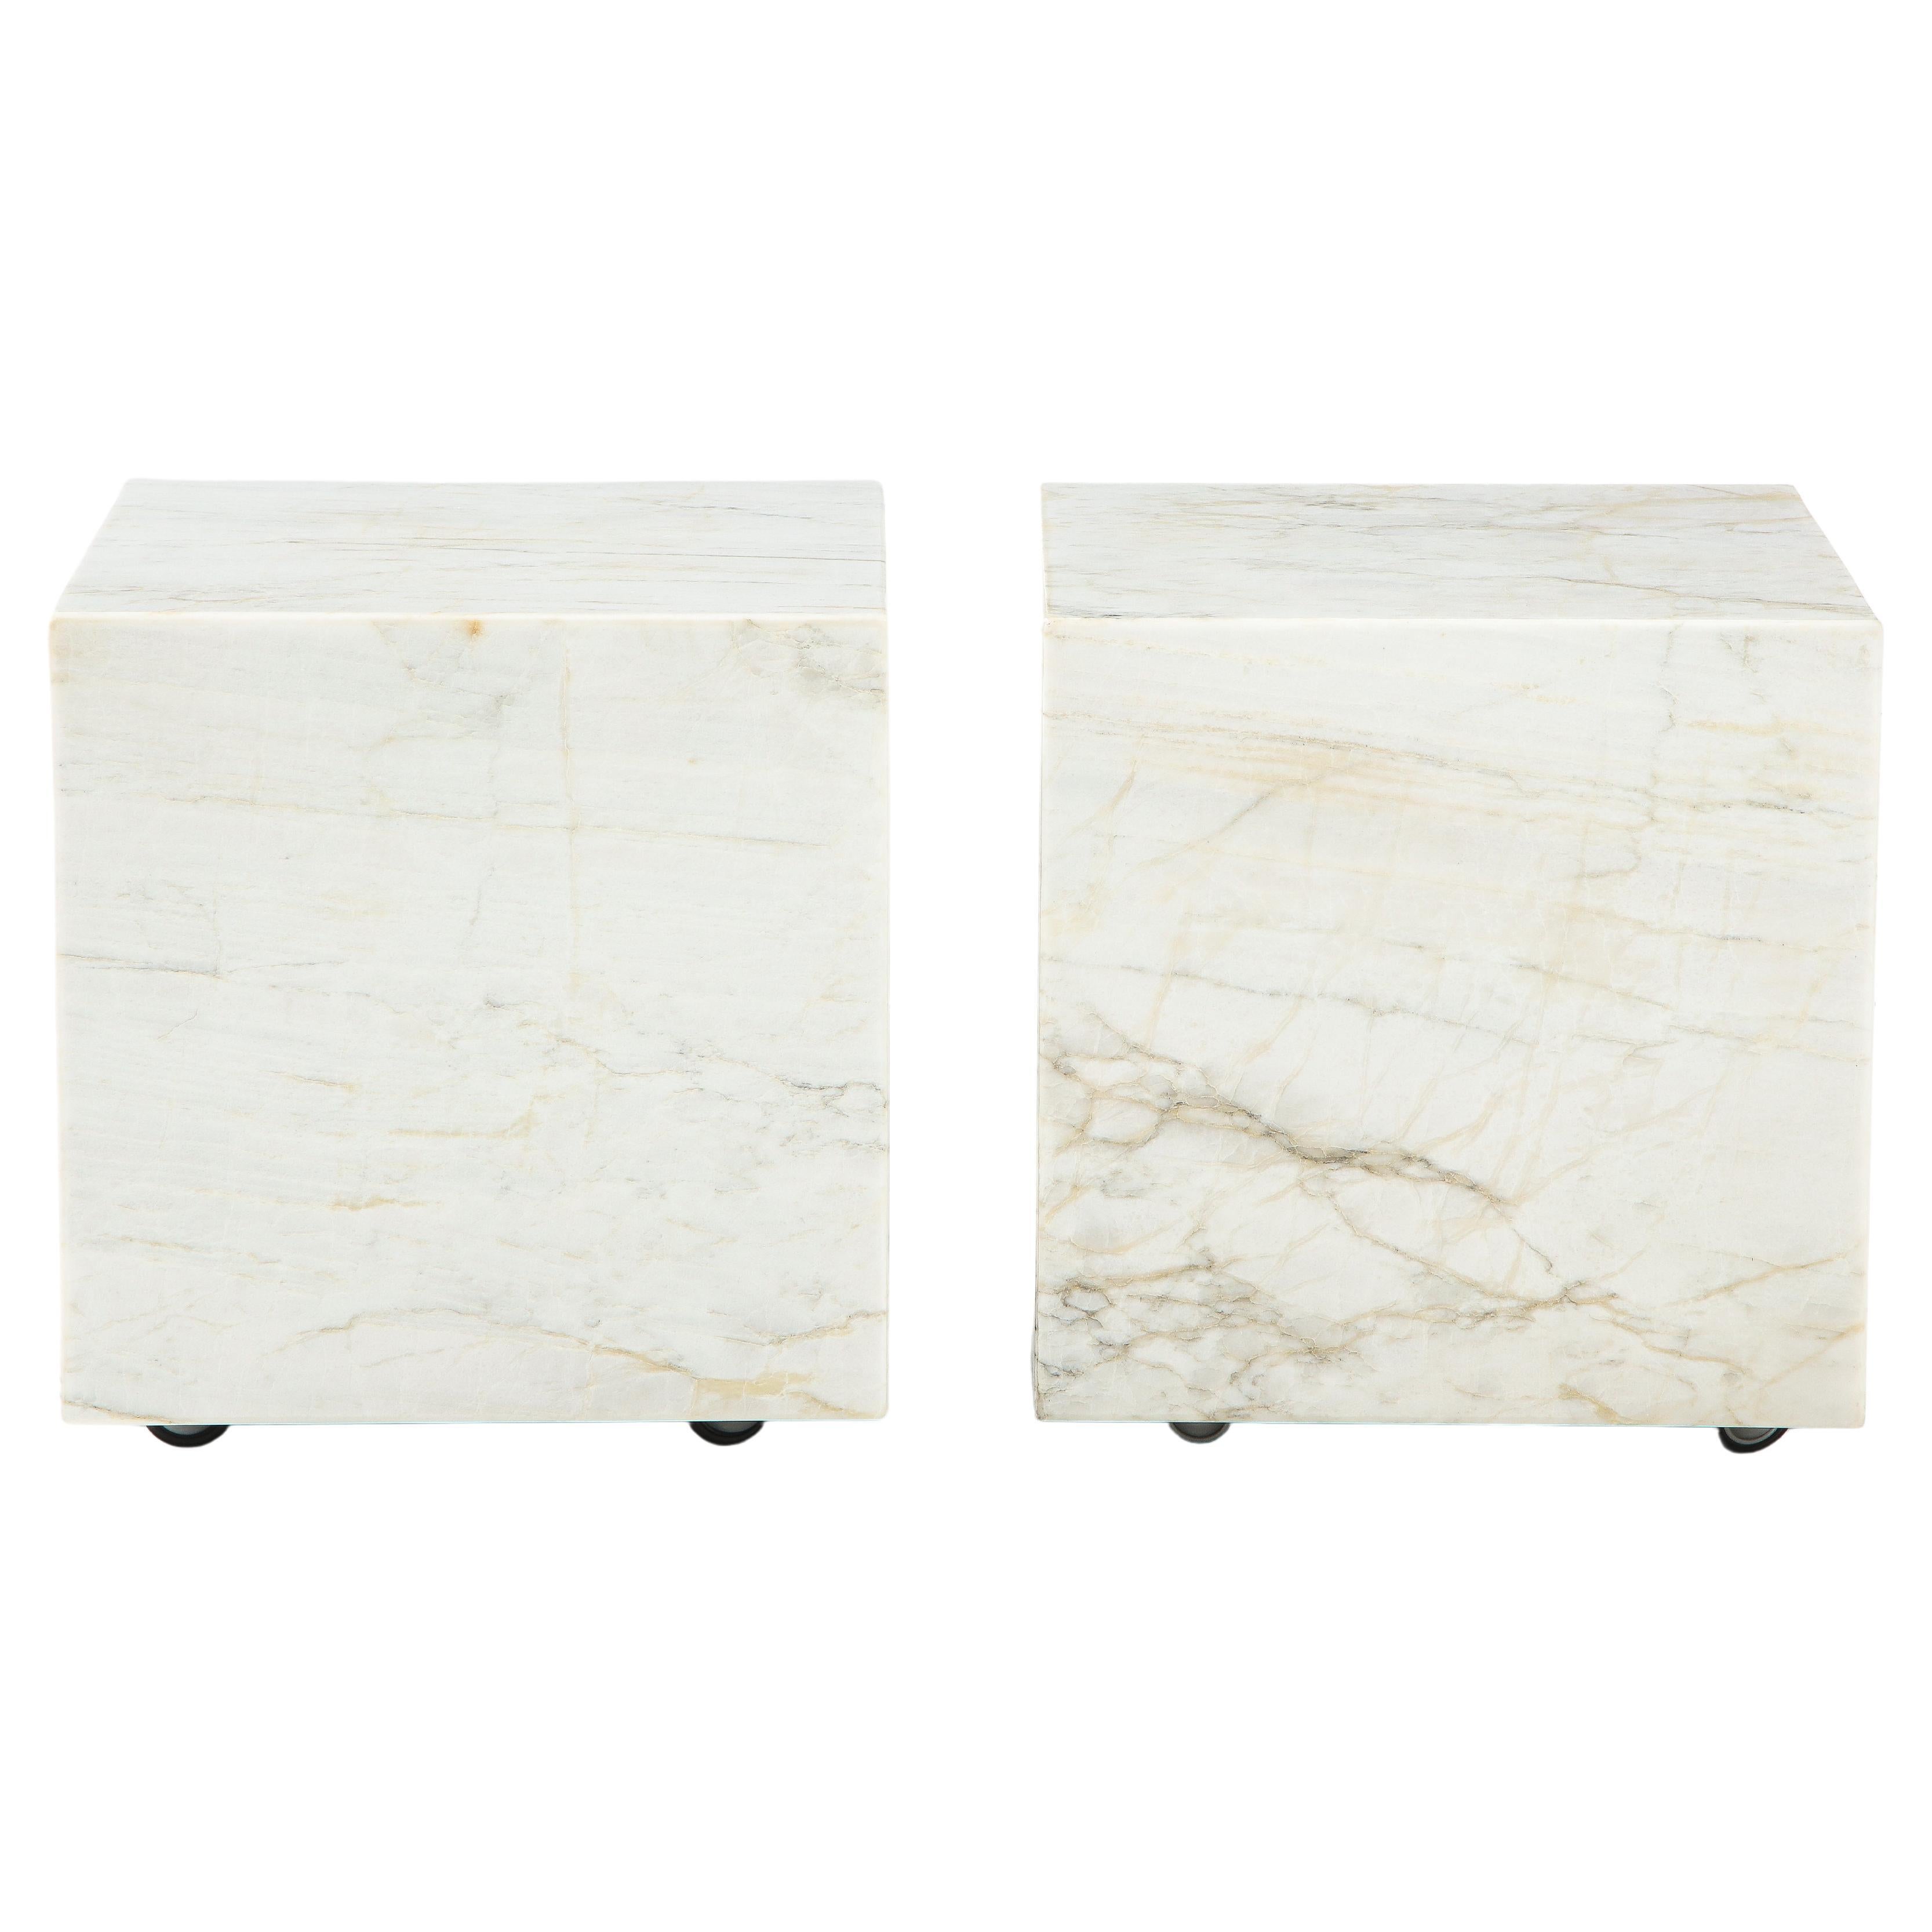 Pair of White Marble Cube Tables